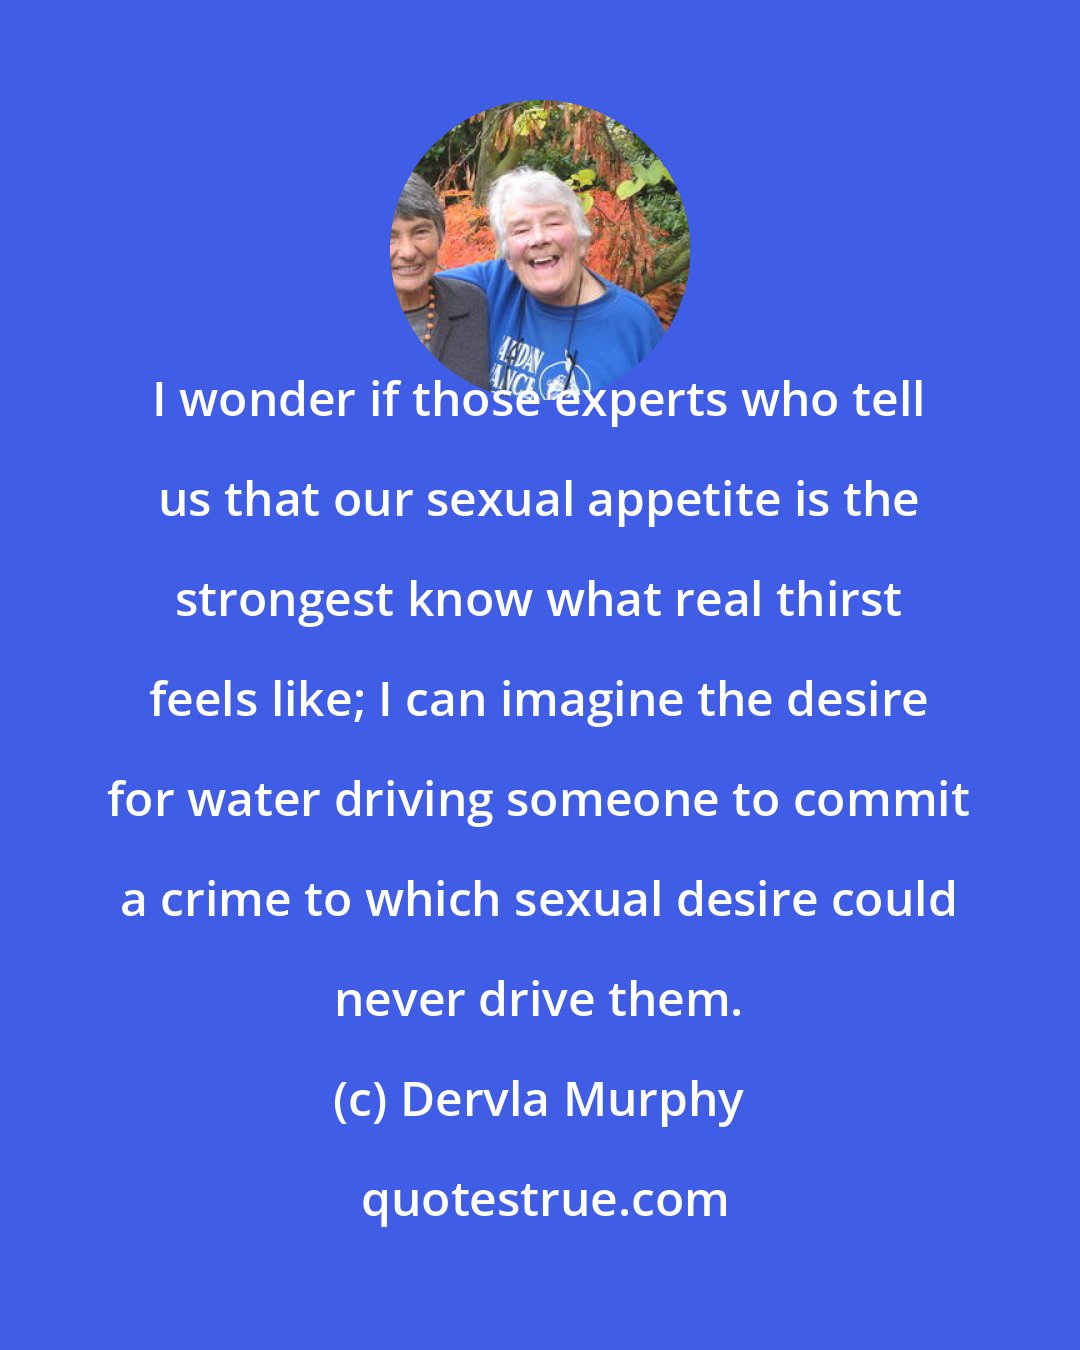 Dervla Murphy: I wonder if those experts who tell us that our sexual appetite is the strongest know what real thirst feels like; I can imagine the desire for water driving someone to commit a crime to which sexual desire could never drive them.